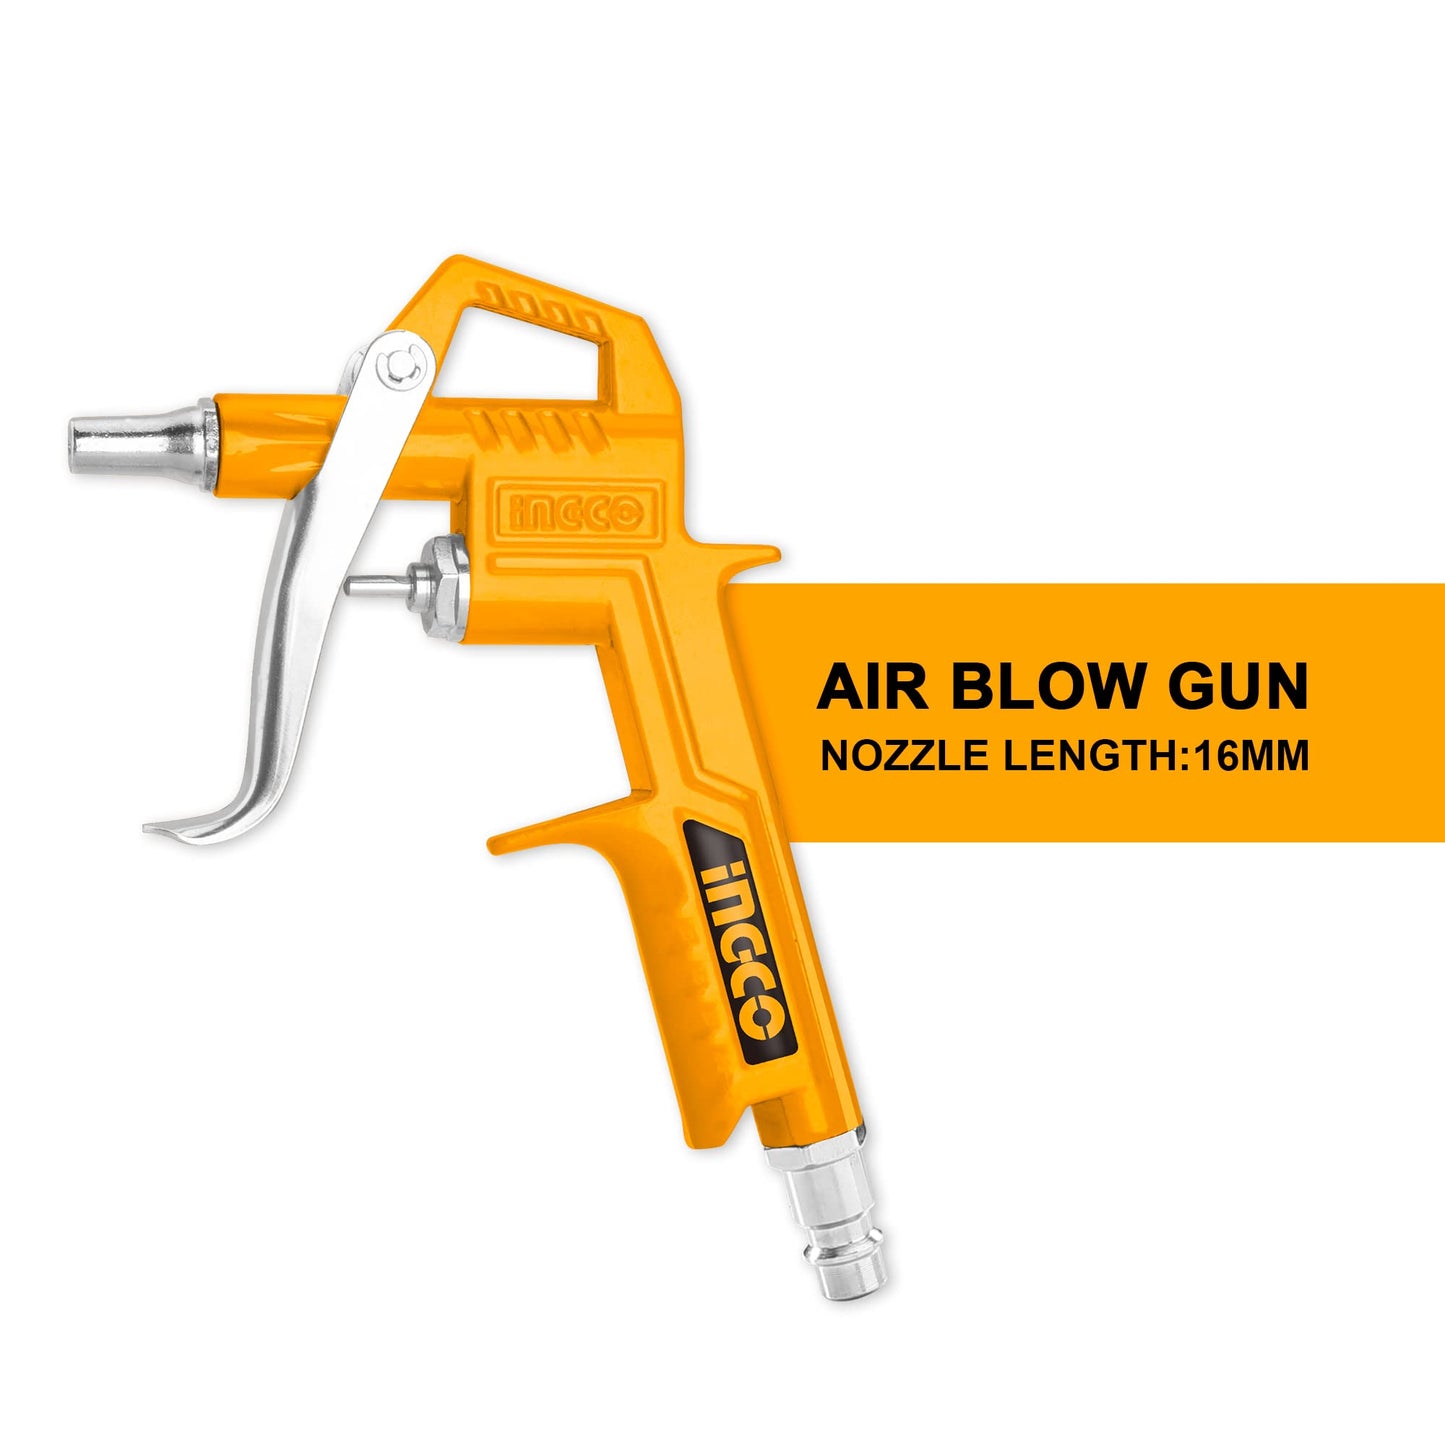 INGCO Air Duster Blow Gun with NITTO Type Connector, 16mm Nozzle Length ABG031-3 and ABG081-3 with 80mm Extension Nozzle | ABG031-3 ABG081-3